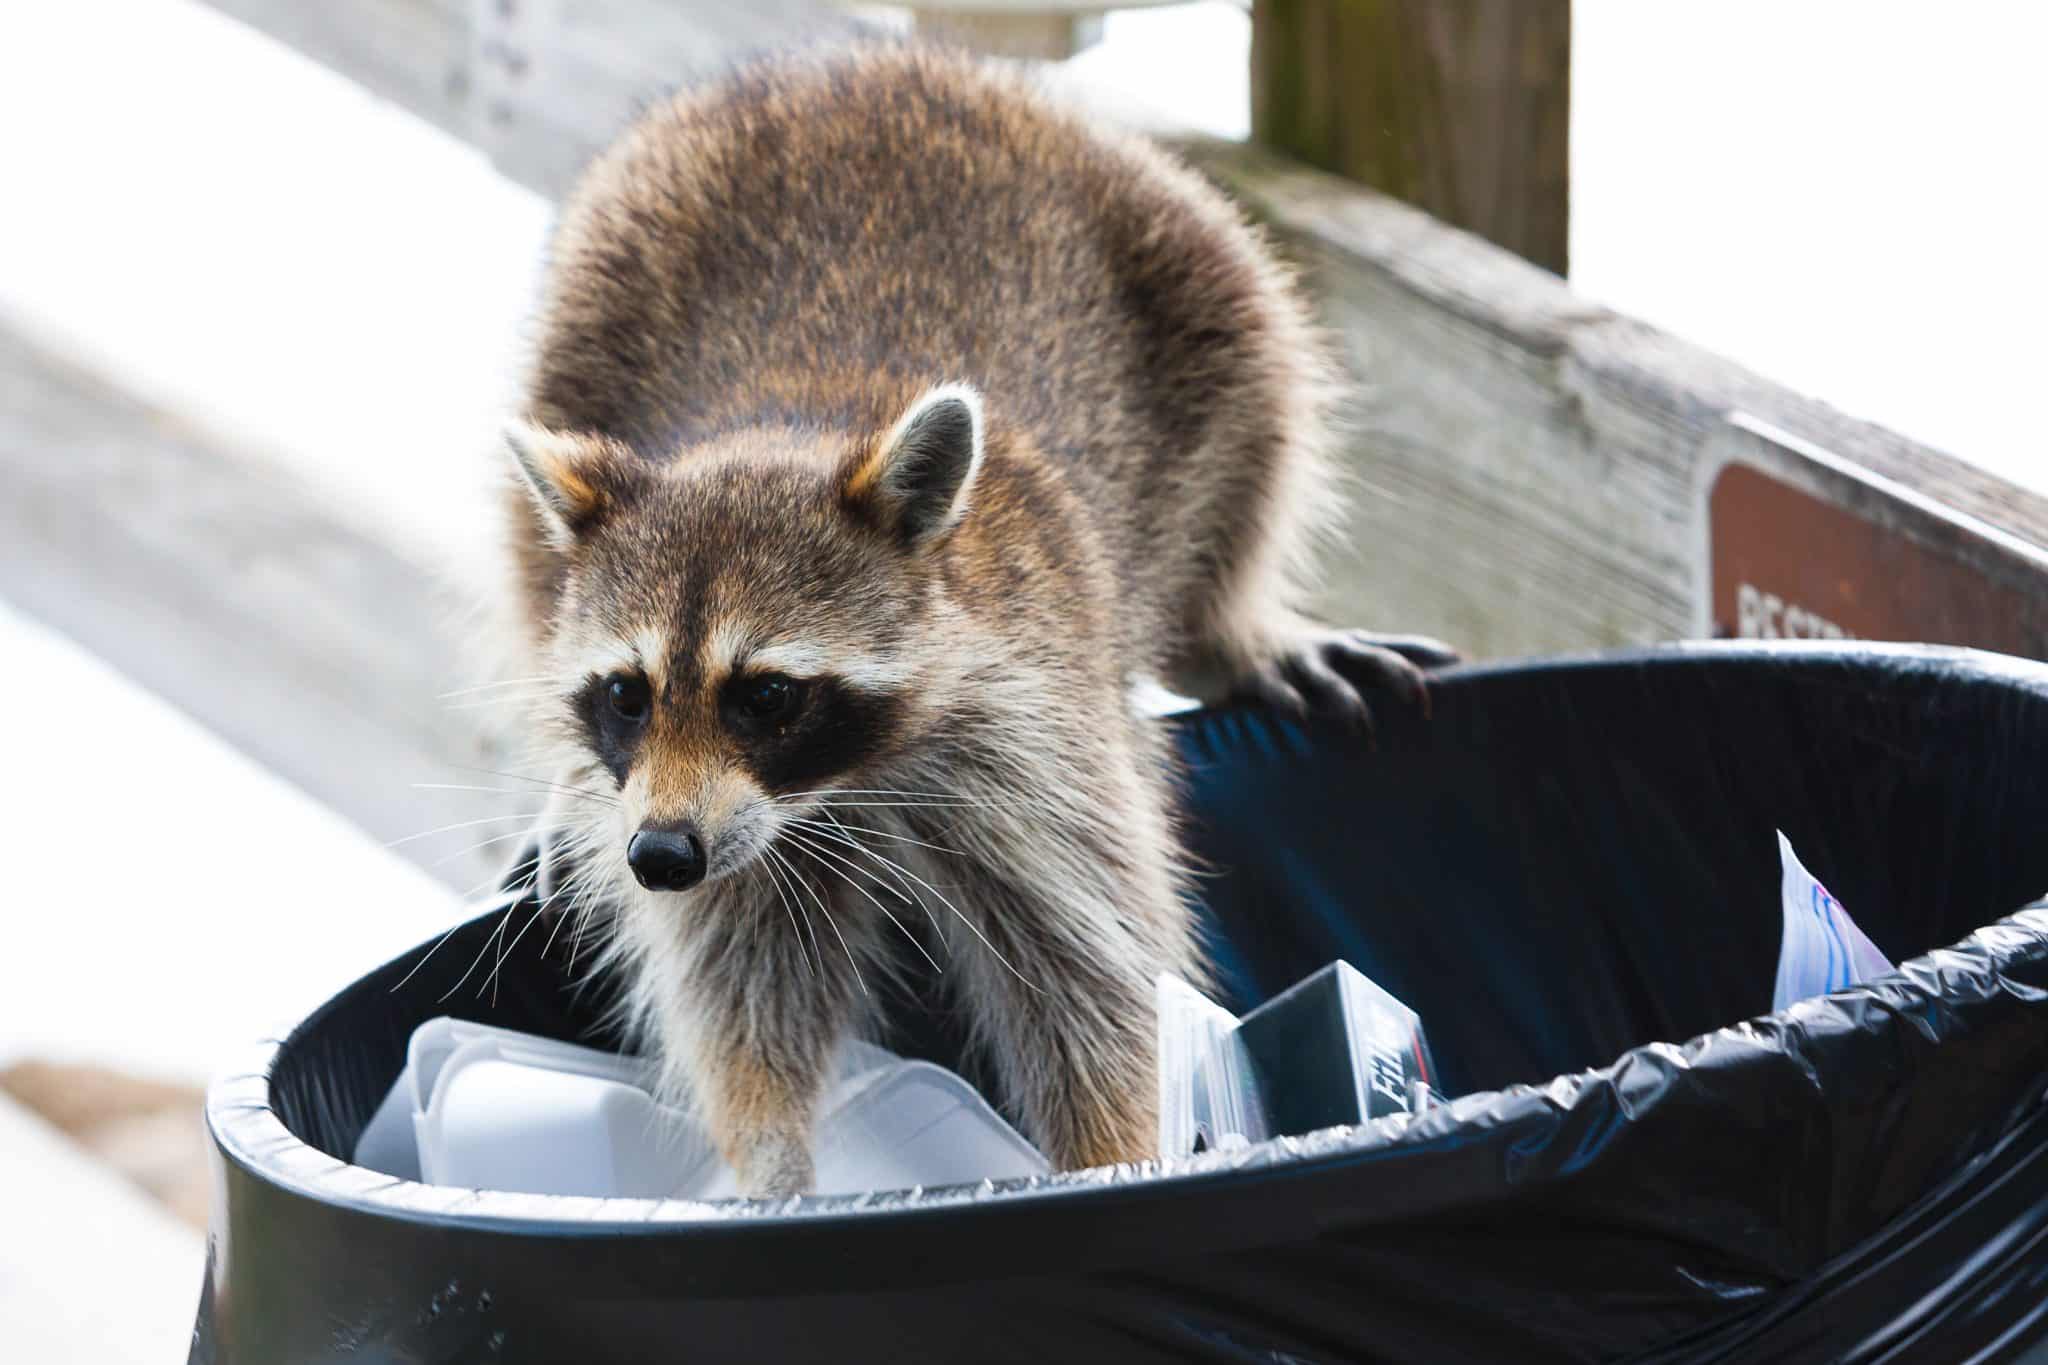 Racoon looking for food in trash can